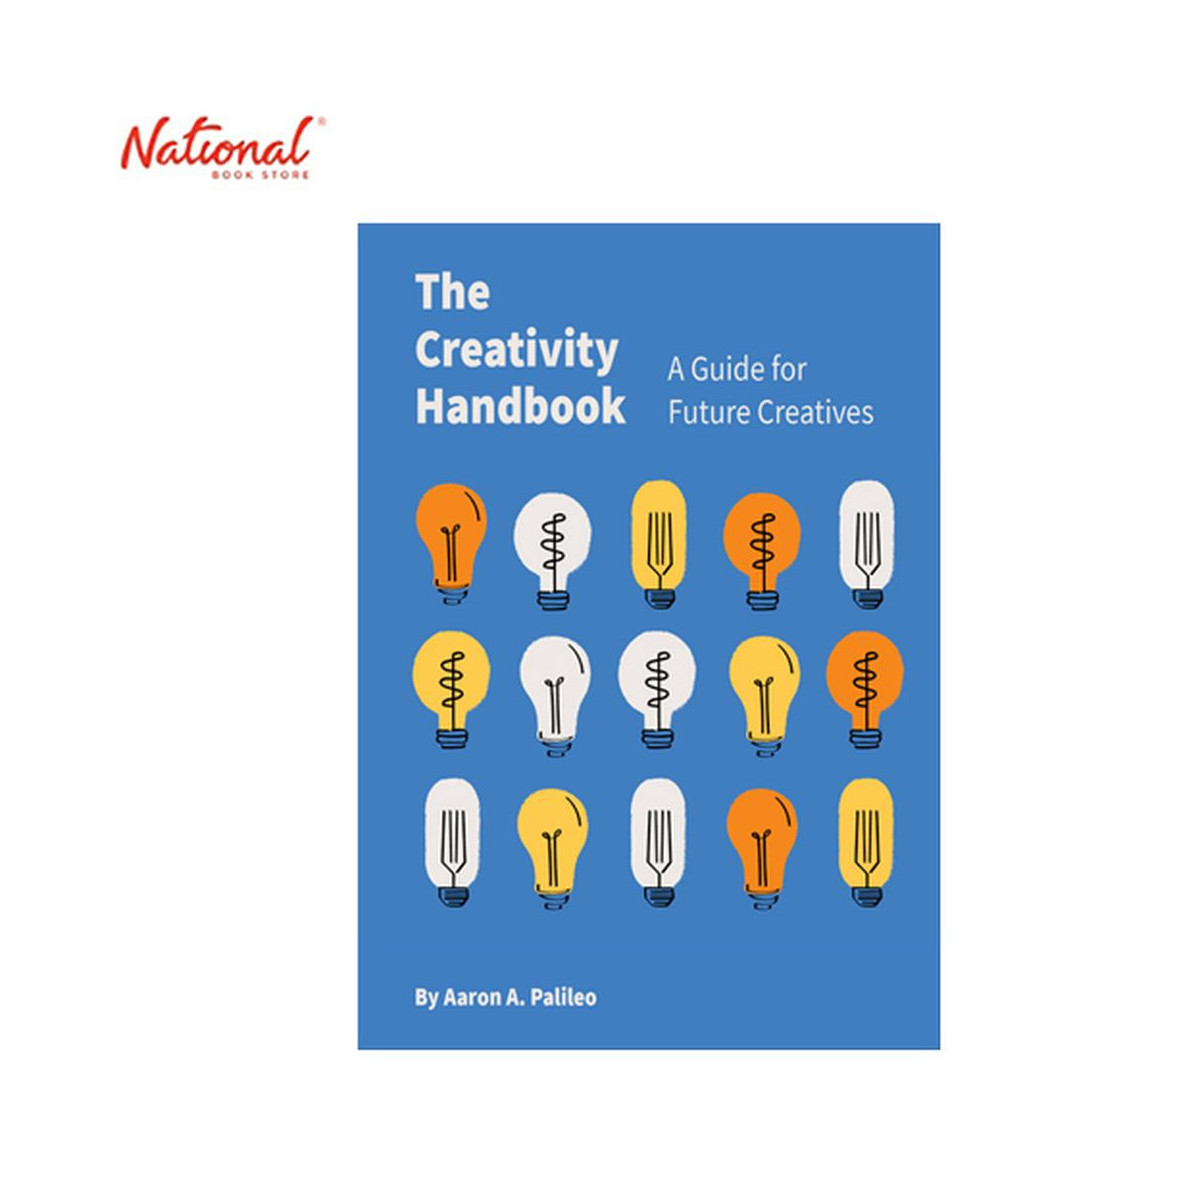 The Creativity Handbook: A Guide for Future Creatives Trade paperback by Aaron Palileo